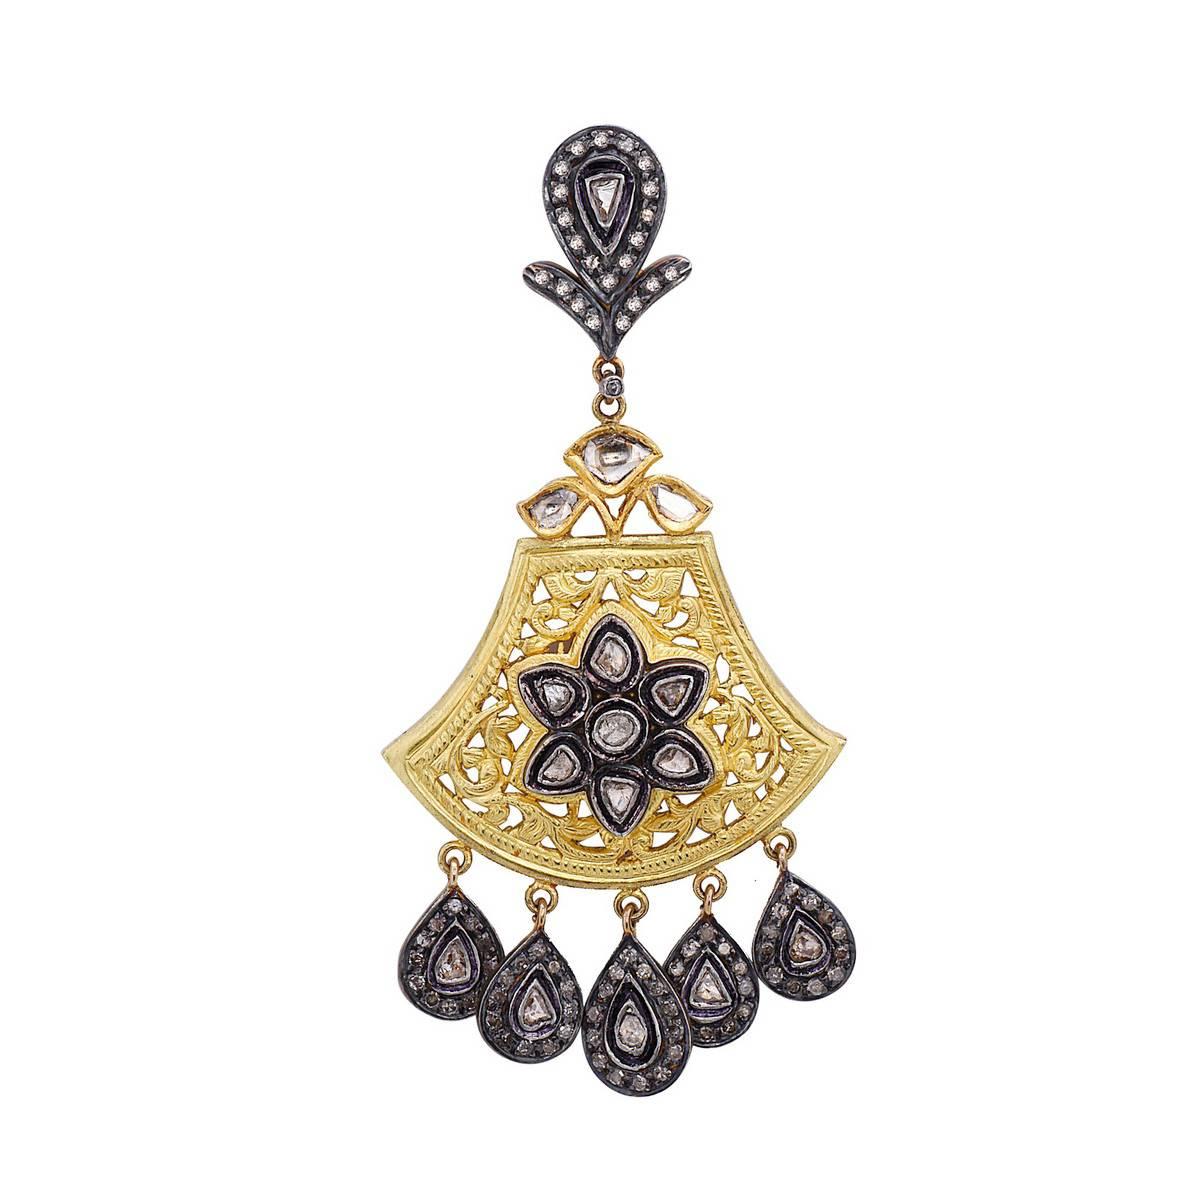 Rose Cut Diamond Dangle Earrings With Filigree Work Made In 14k Gold & Silver In New Condition For Sale In New York, NY